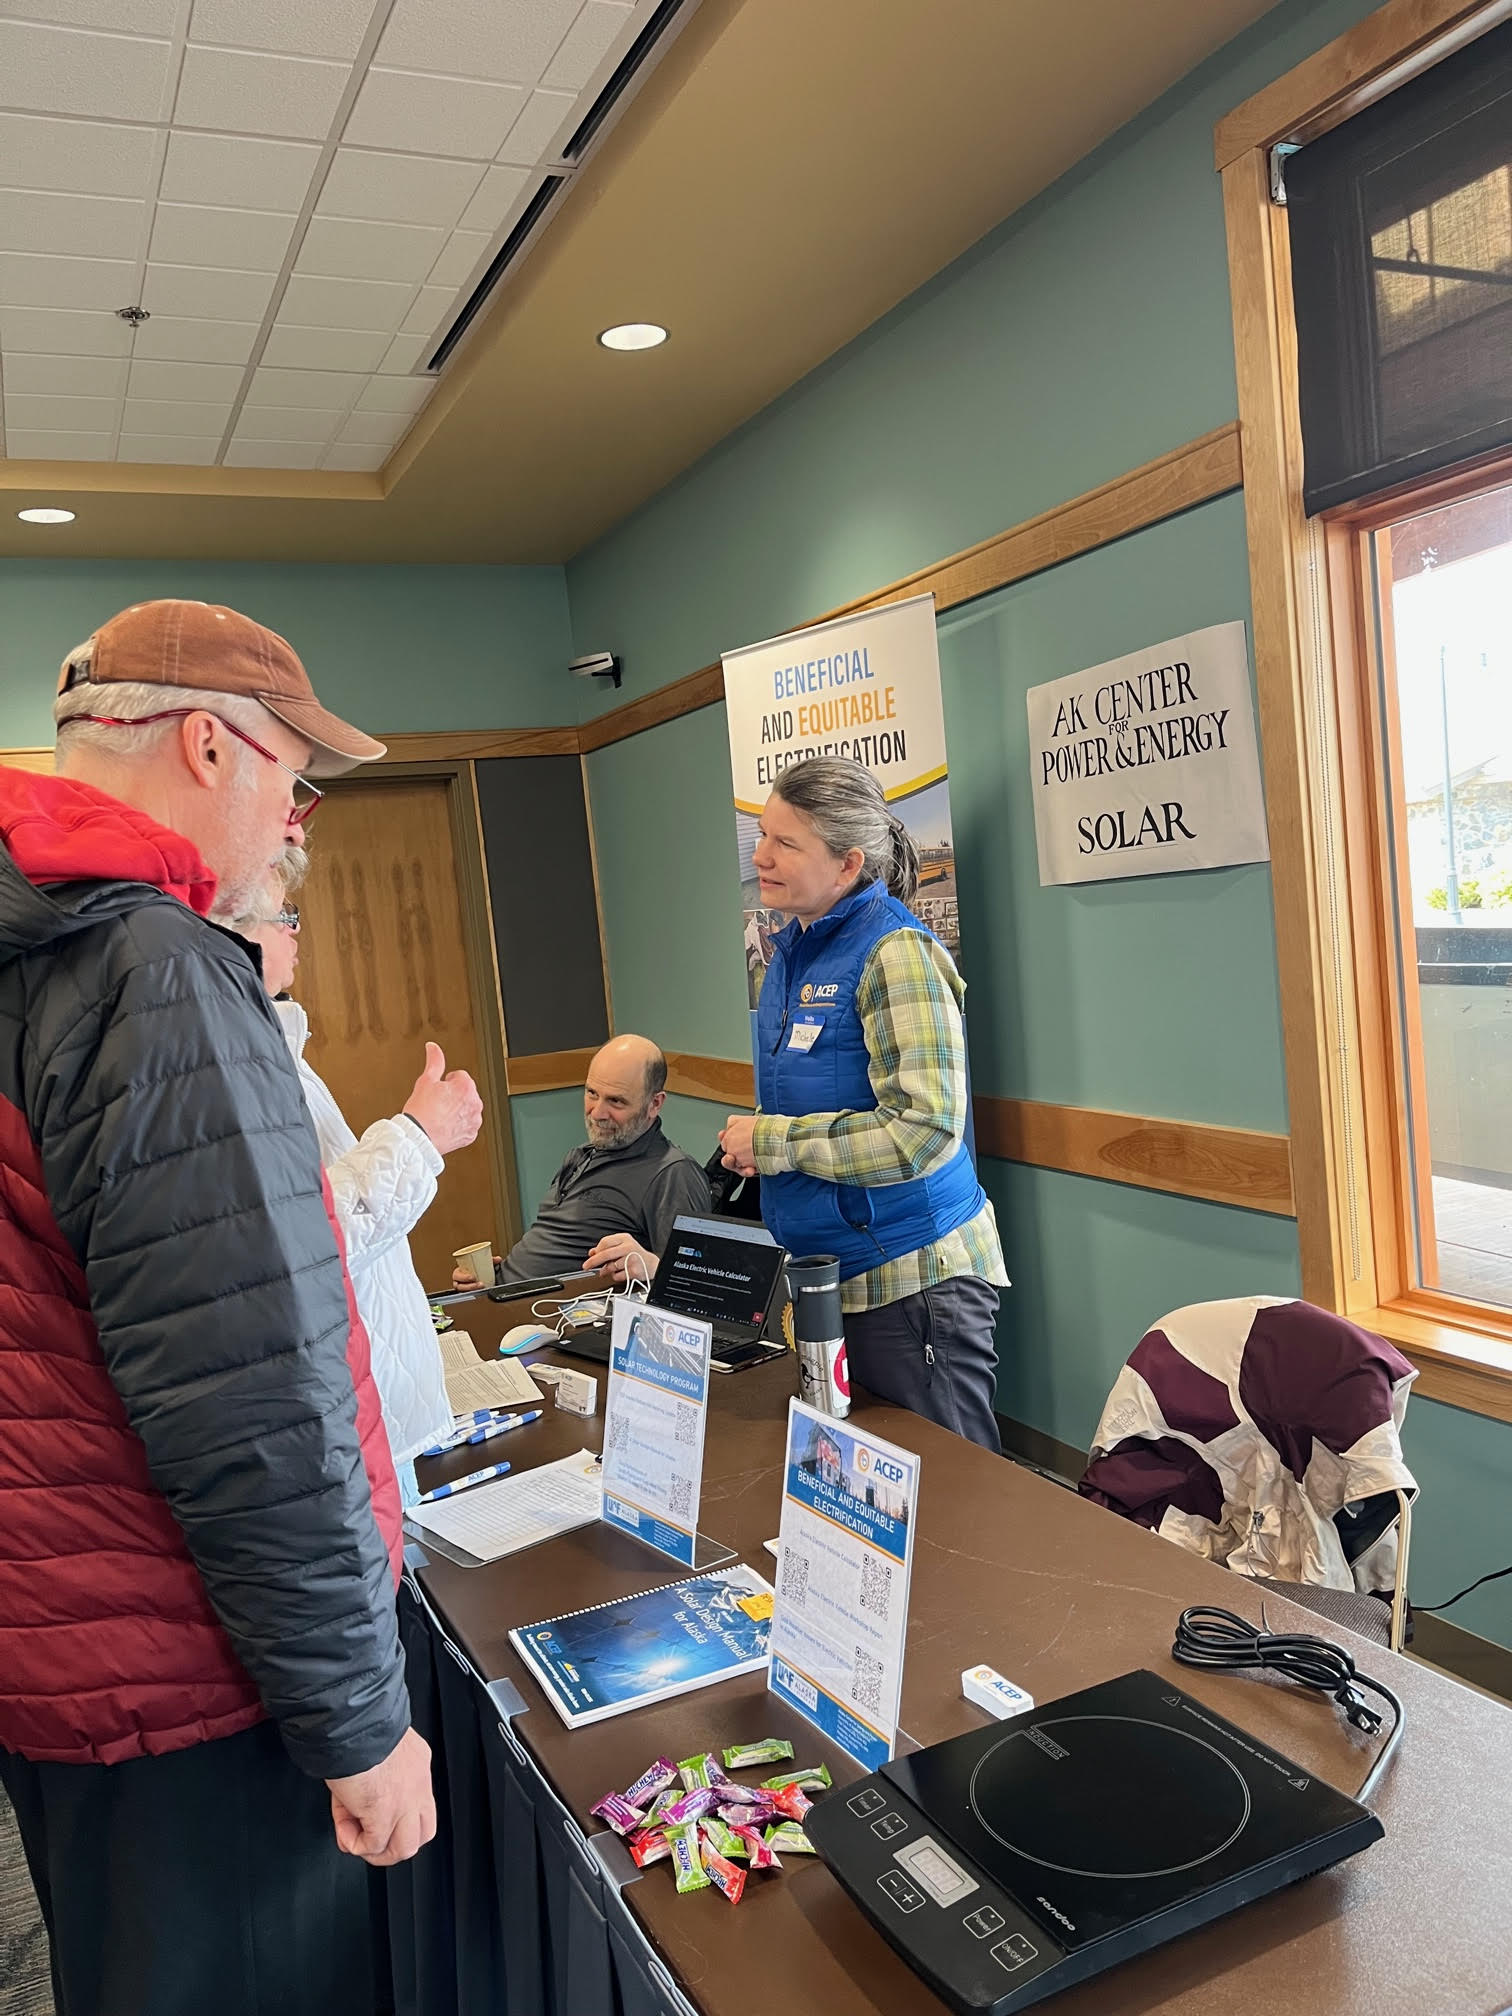 Michelle Wilber speaks to Sitka community members about beneficial electrification at the Sitka Electrification Expo on March 18. Photo courtesy of Michelle Wilber.